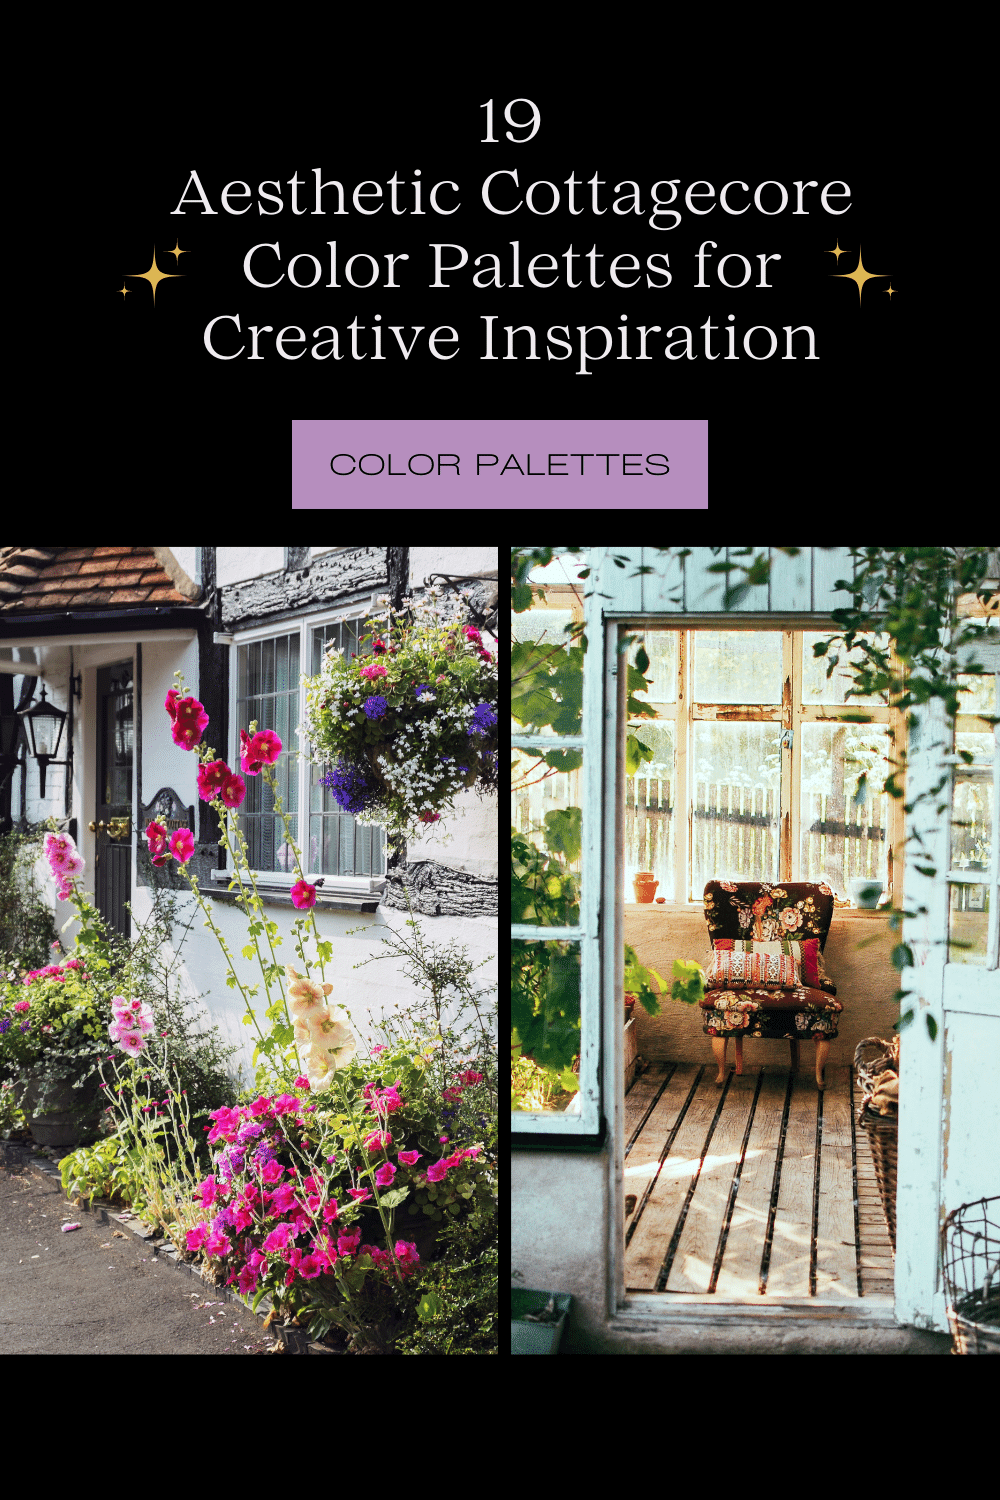 19 Aesthetic Cottagecore Color Palettes for Creative Inspiration